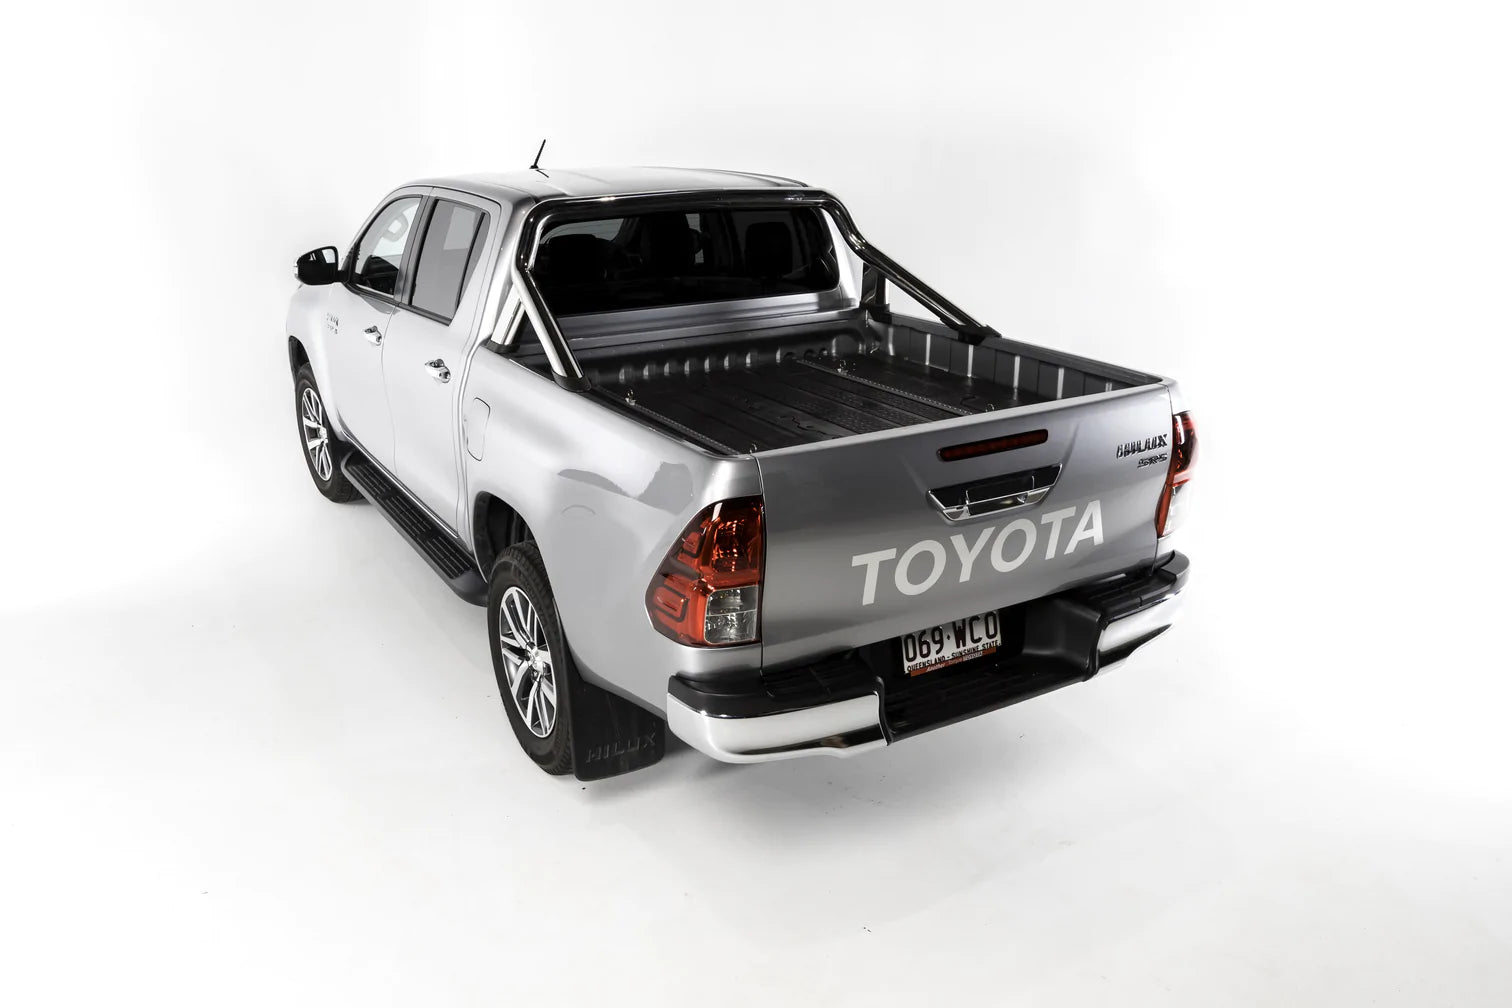 DECKED Drawer 1429mm - Toyota Hilux Revo 2016+ Double Cab